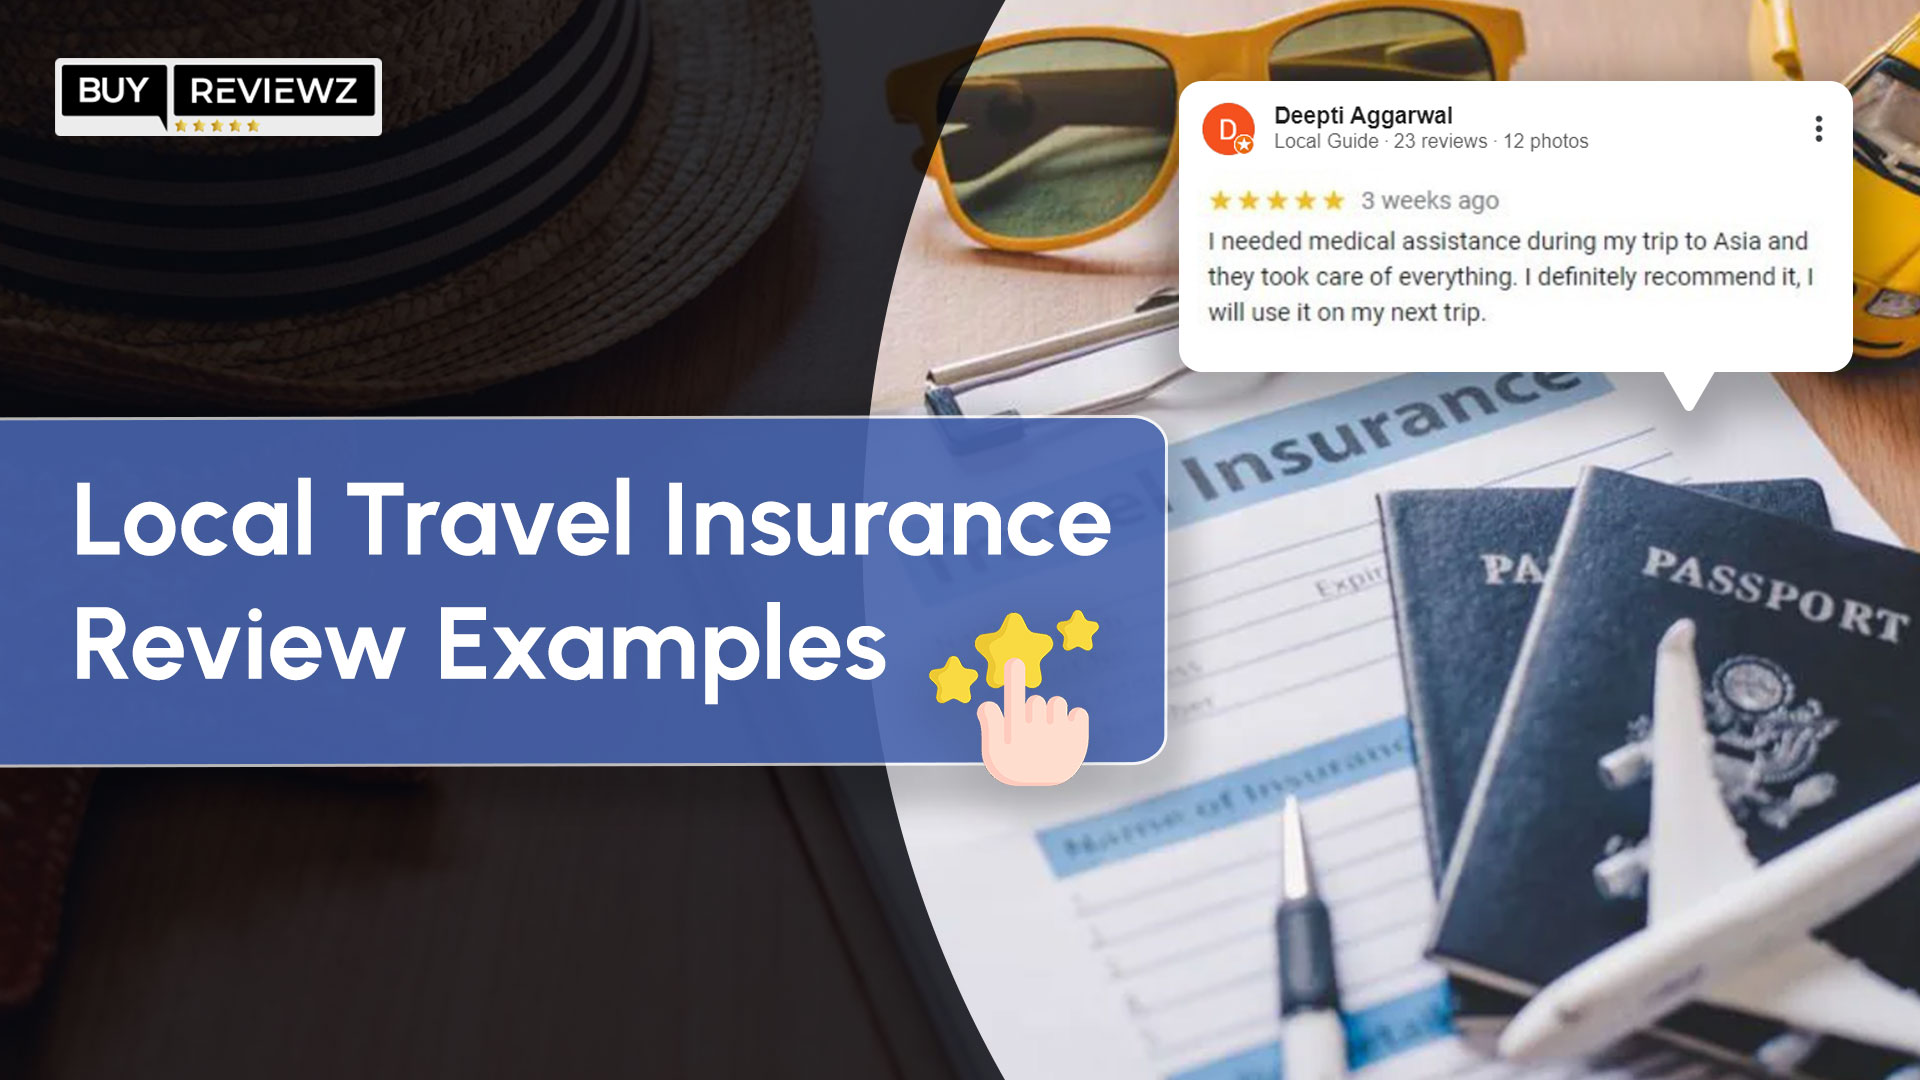 Local Travel Insurance Review Examples